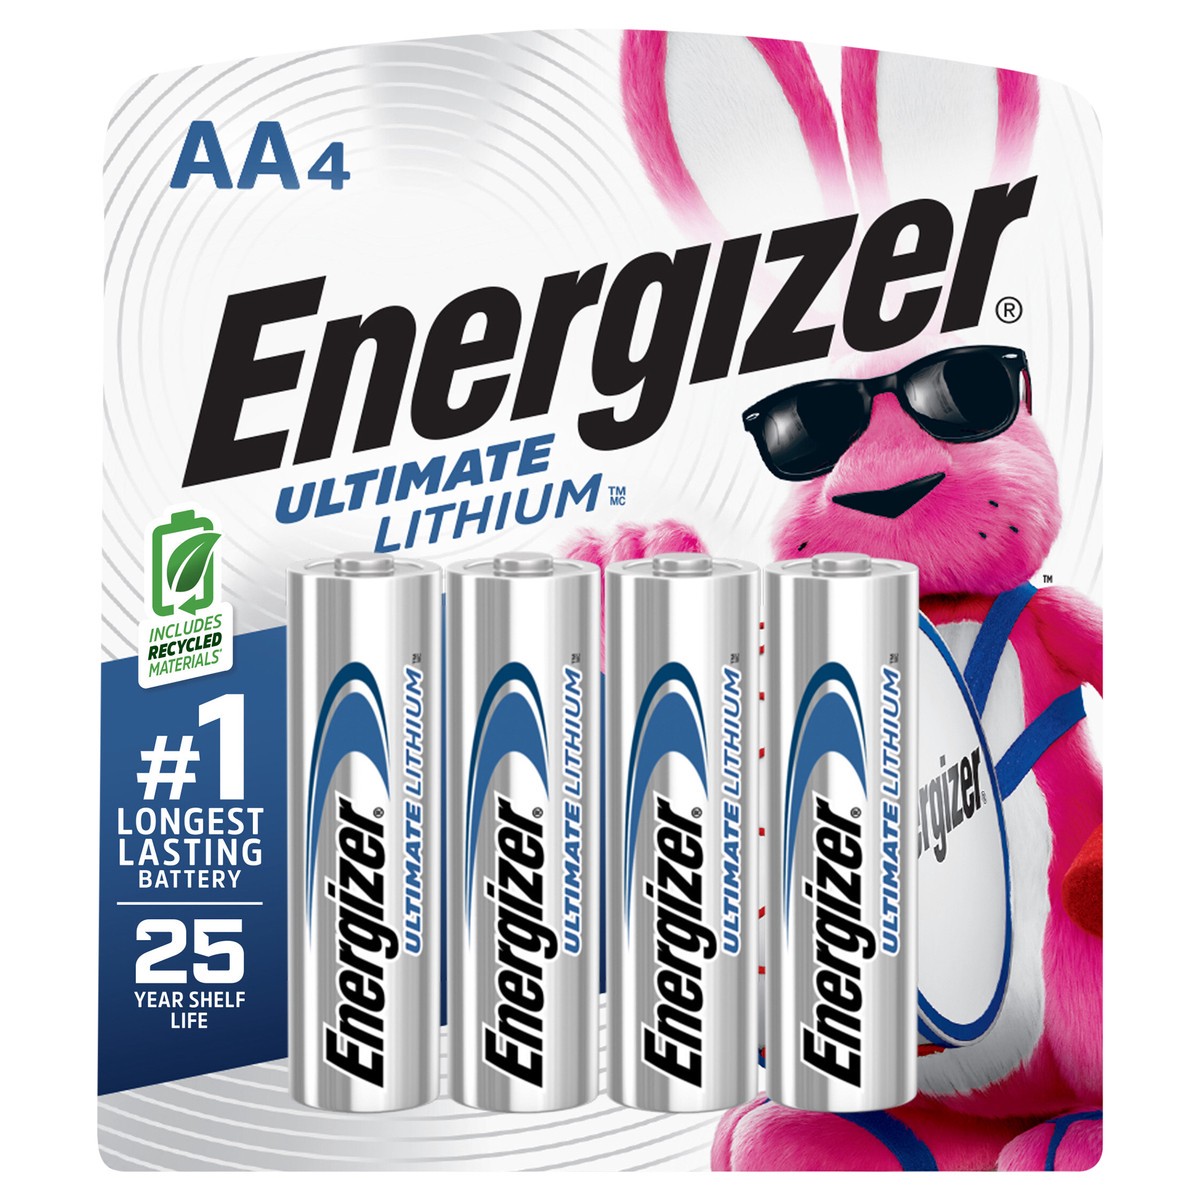 slide 4 of 6, Energizer Ultimate Lithium AA Batteries, 4 ct